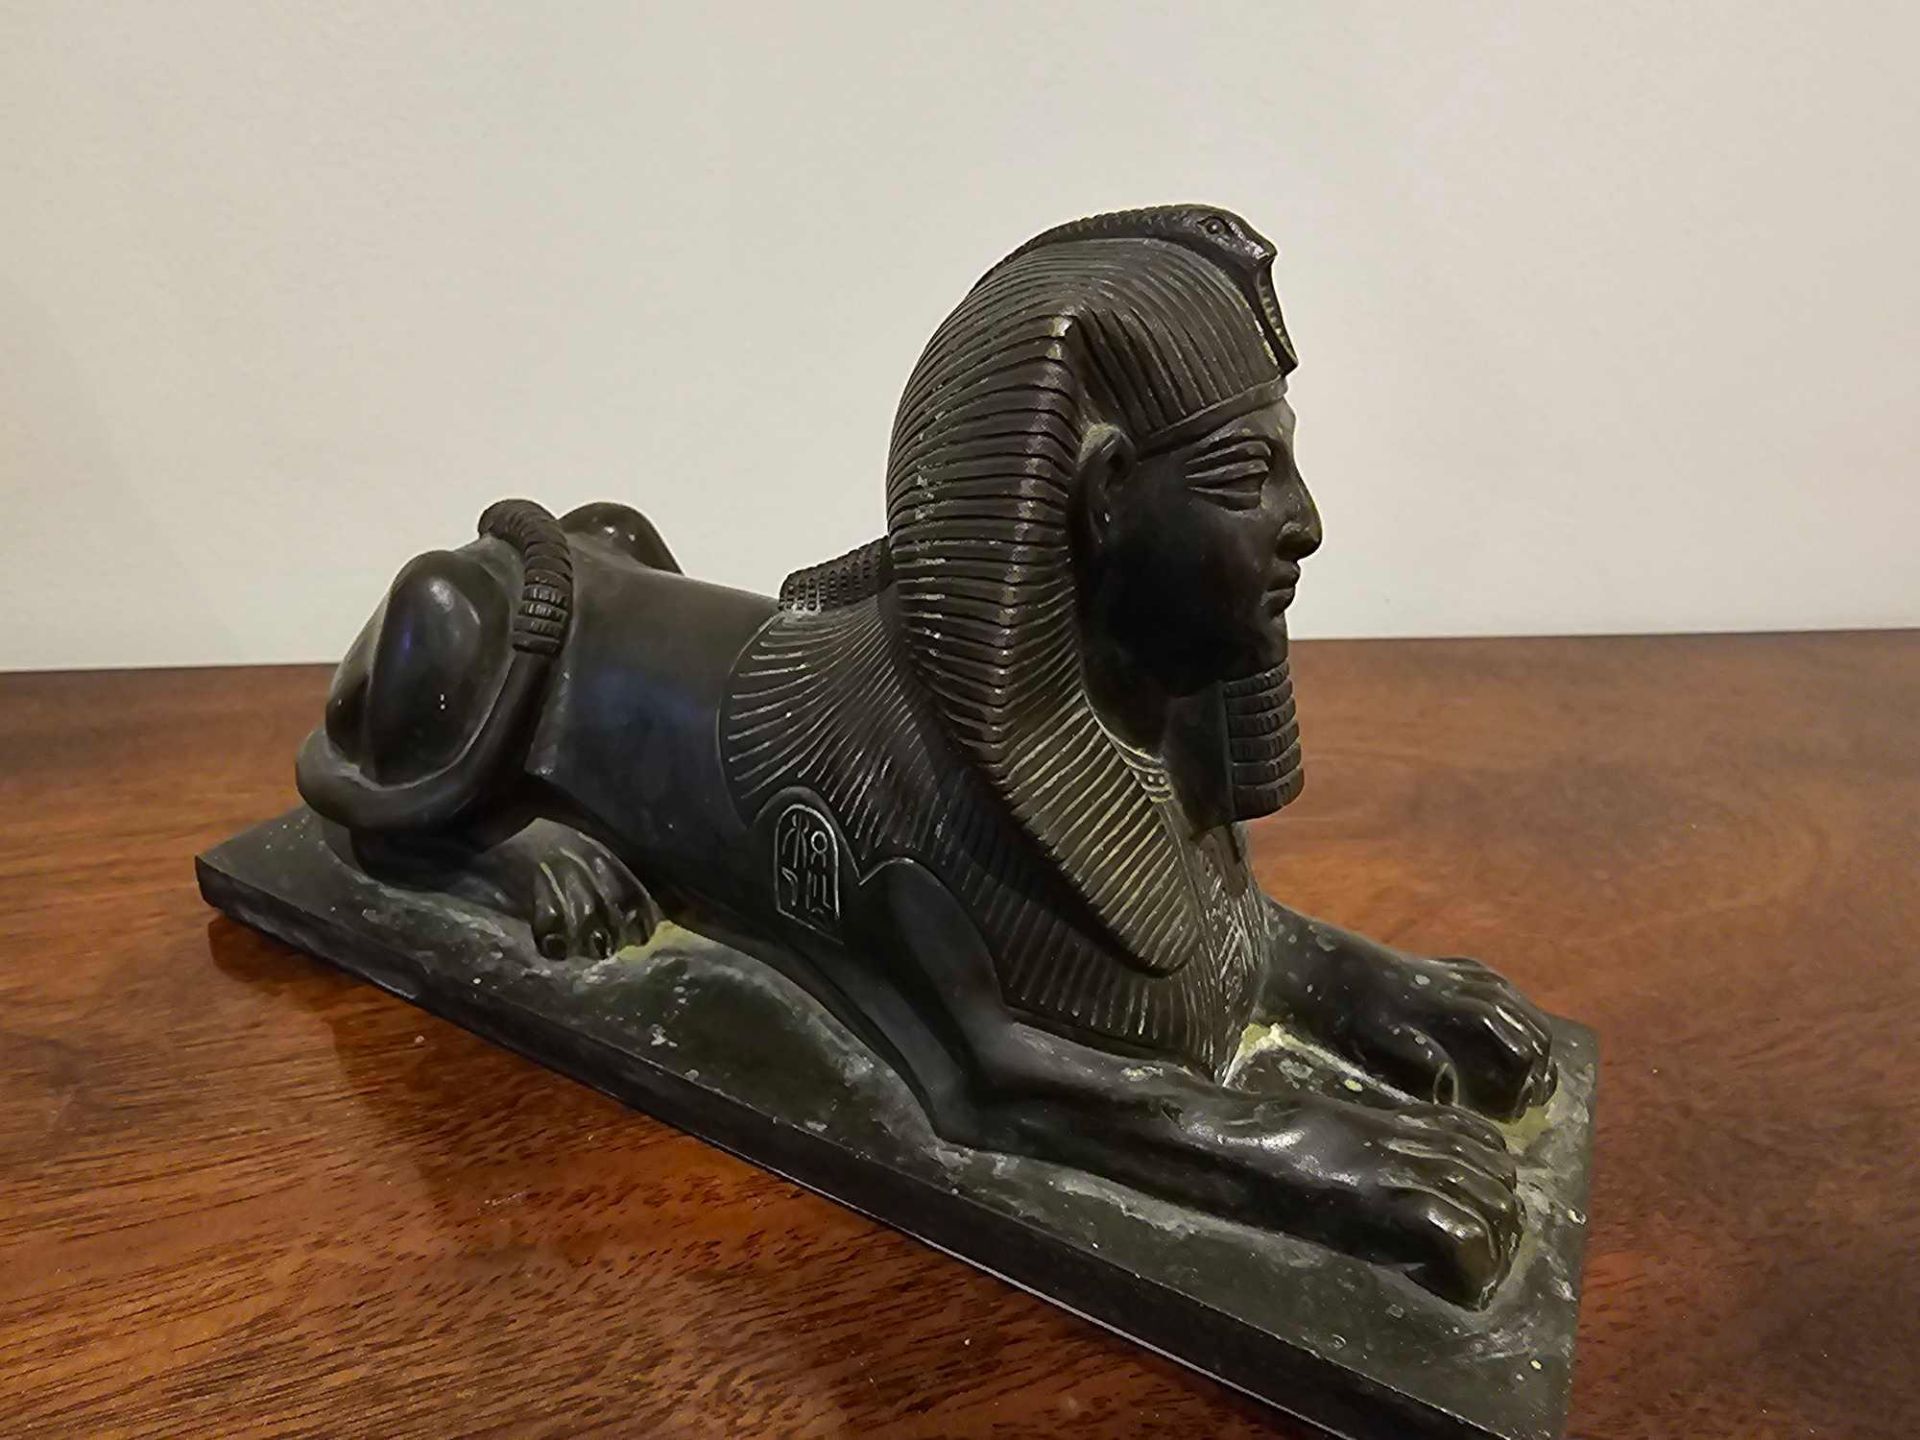 A Cold Cast Egyptian Sphinx Statue - Image 3 of 4